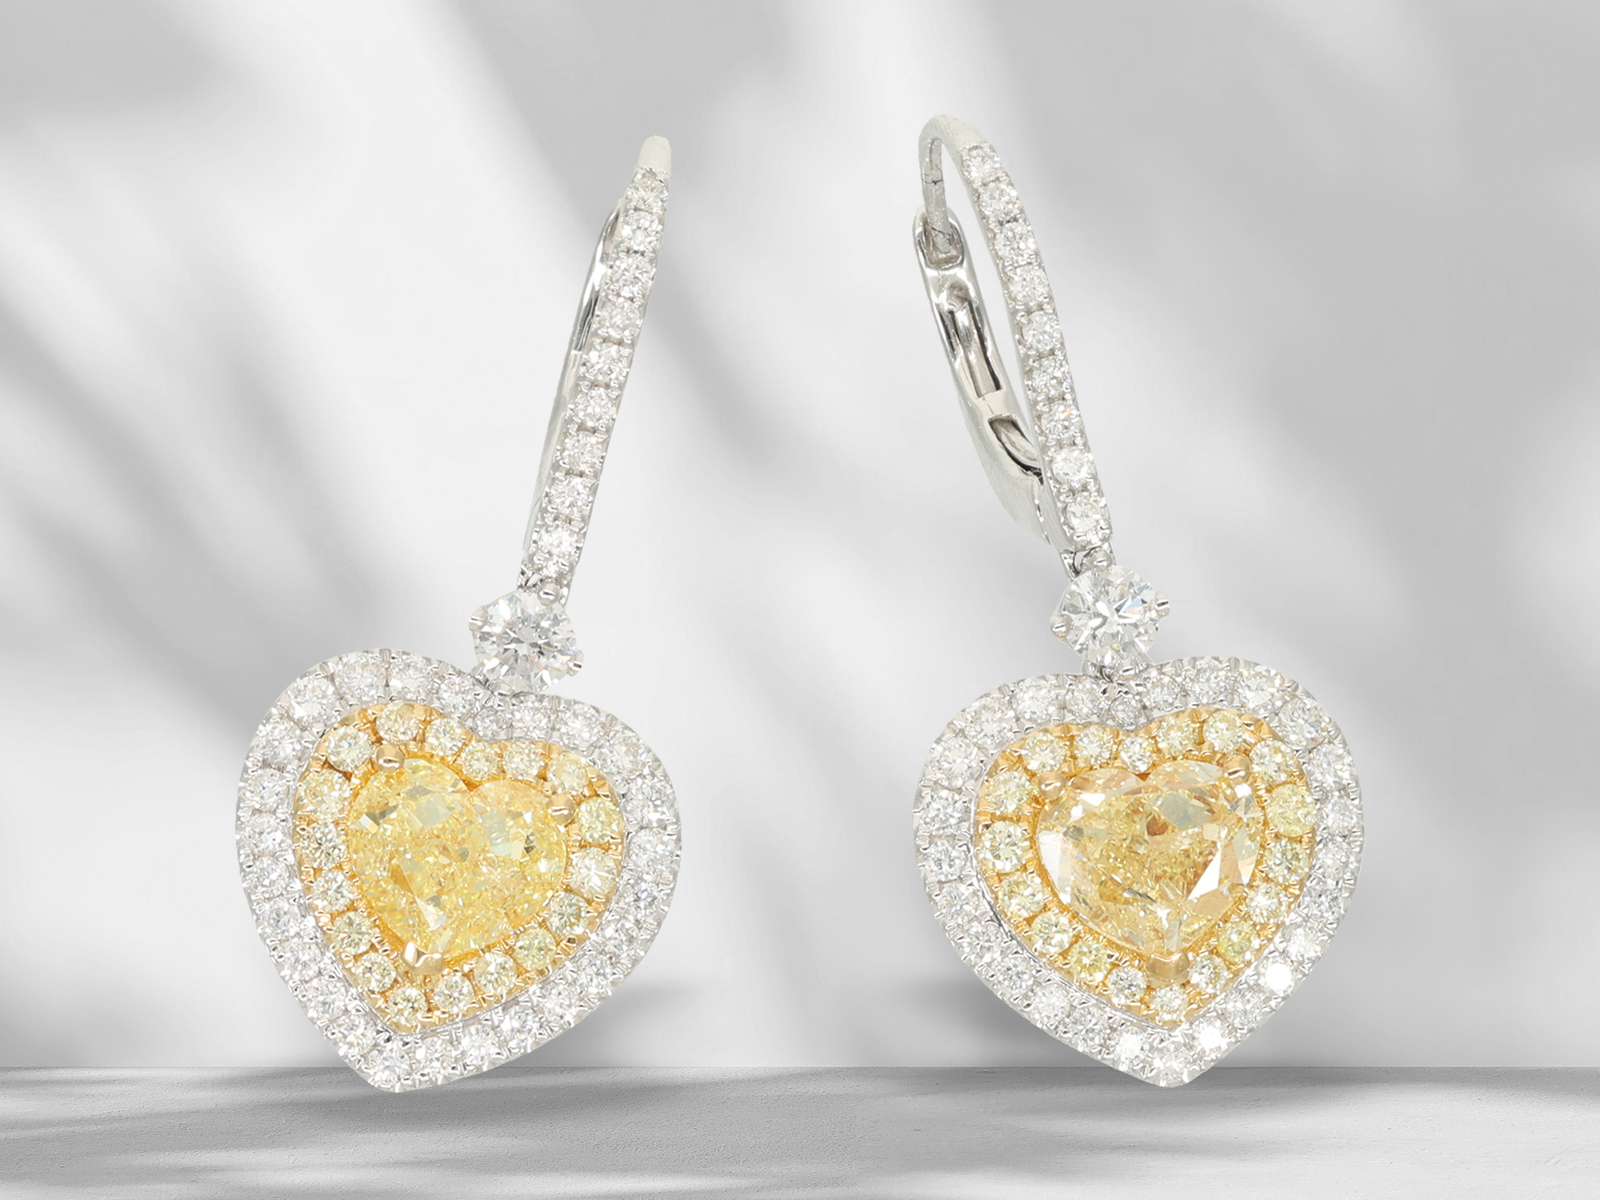 Earrings: High quality earrings set with brilliant-cut diamonds, 2 x 1ct fancy light yellow - Image 4 of 8